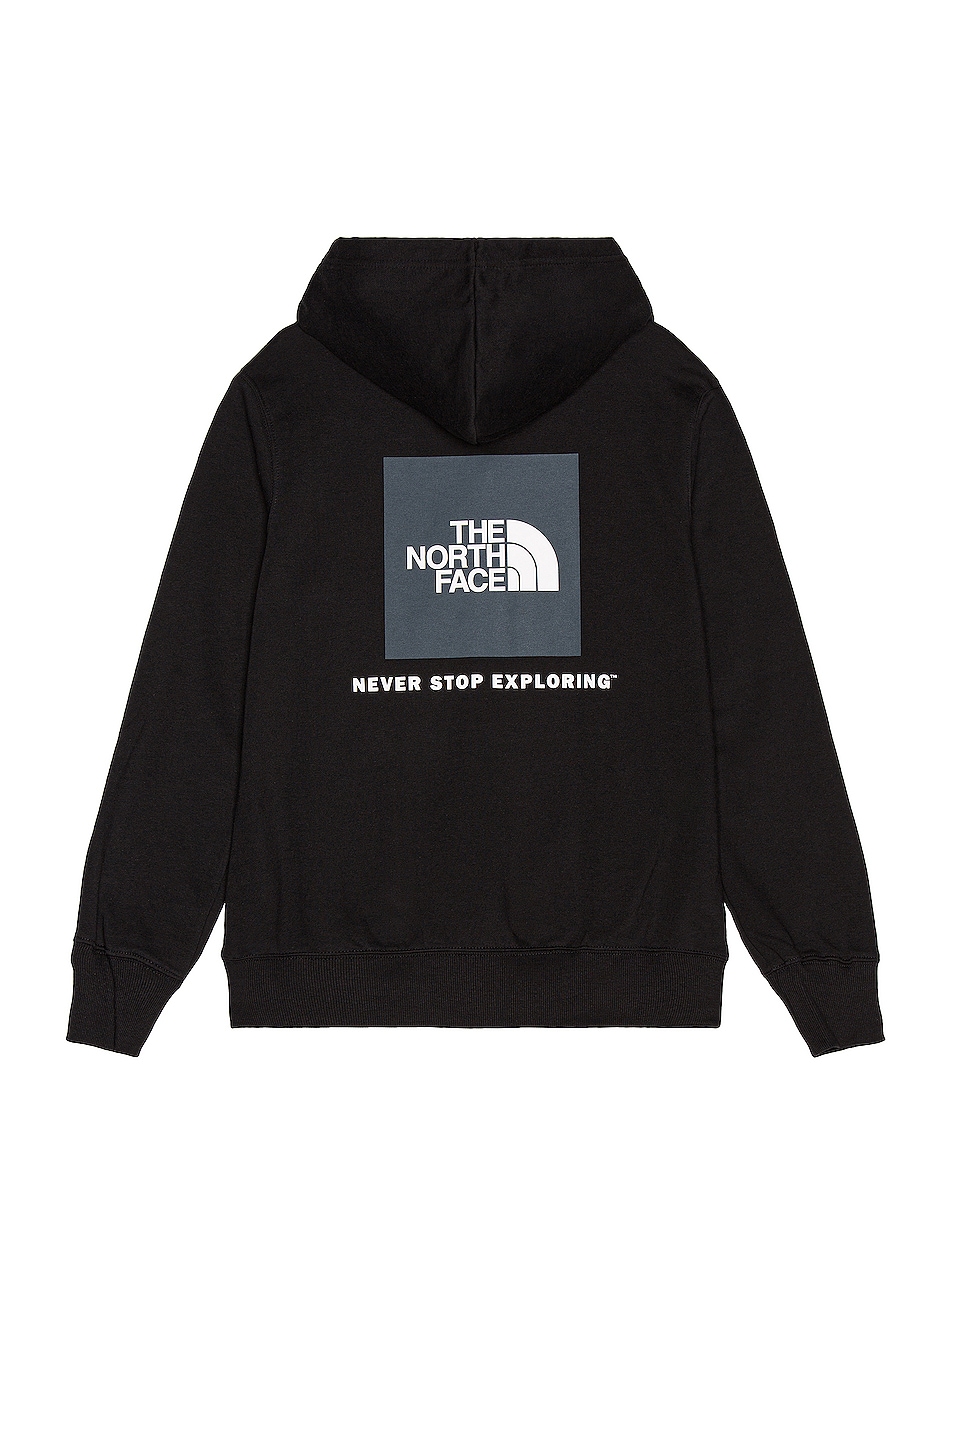 The North Face Box NSE Pullover Hoodie in TNF Black | FWRD